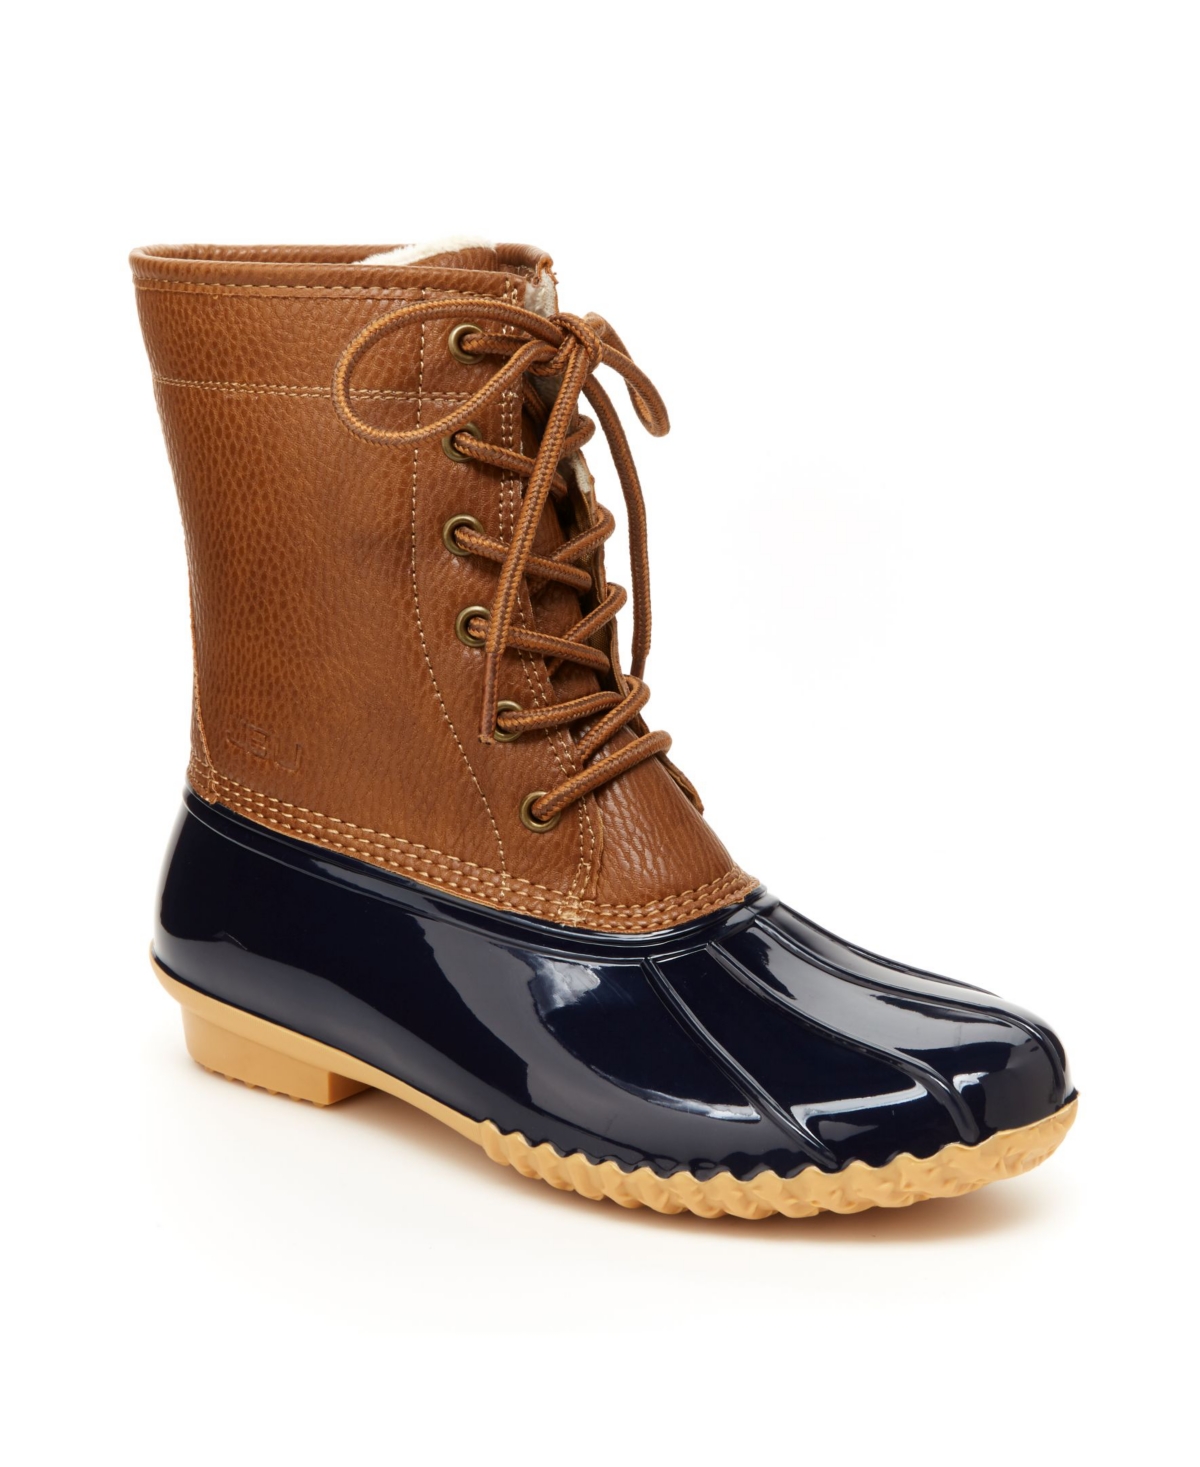 Women's Maplewood Water-Resistant Lace-up Boots - Navy